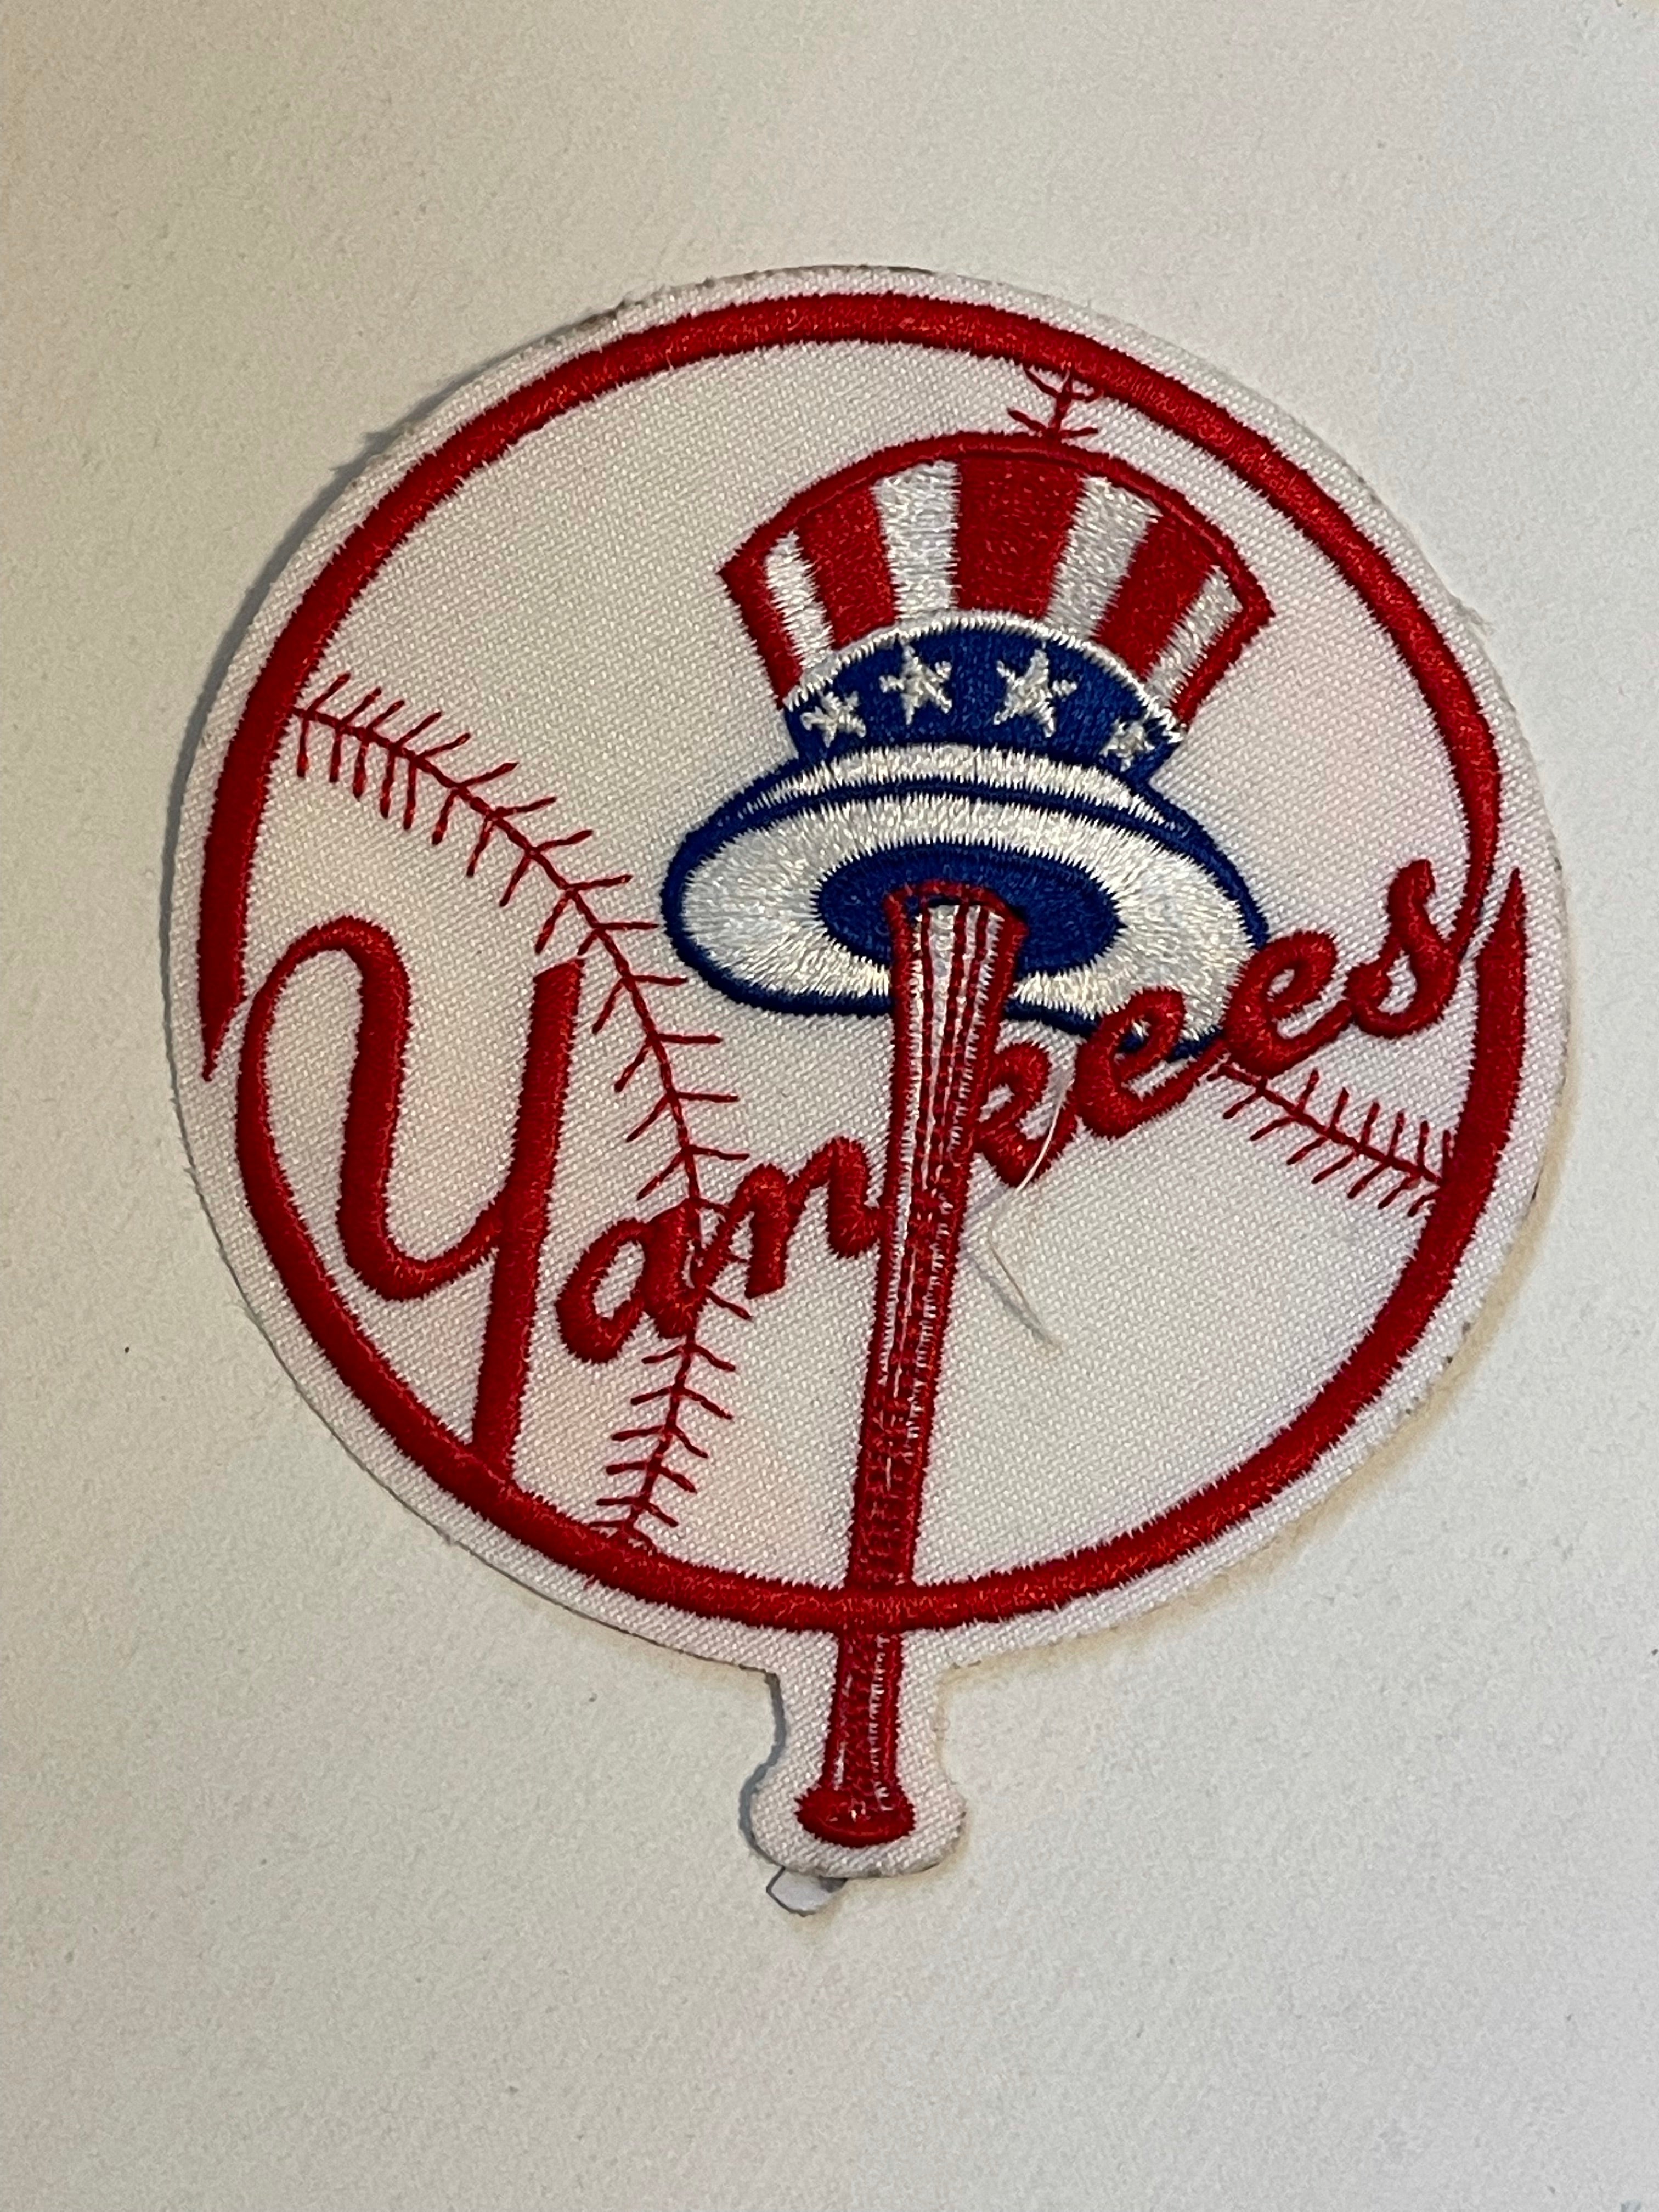 New York Yankees vintage 5 inch baseball patch 1990s